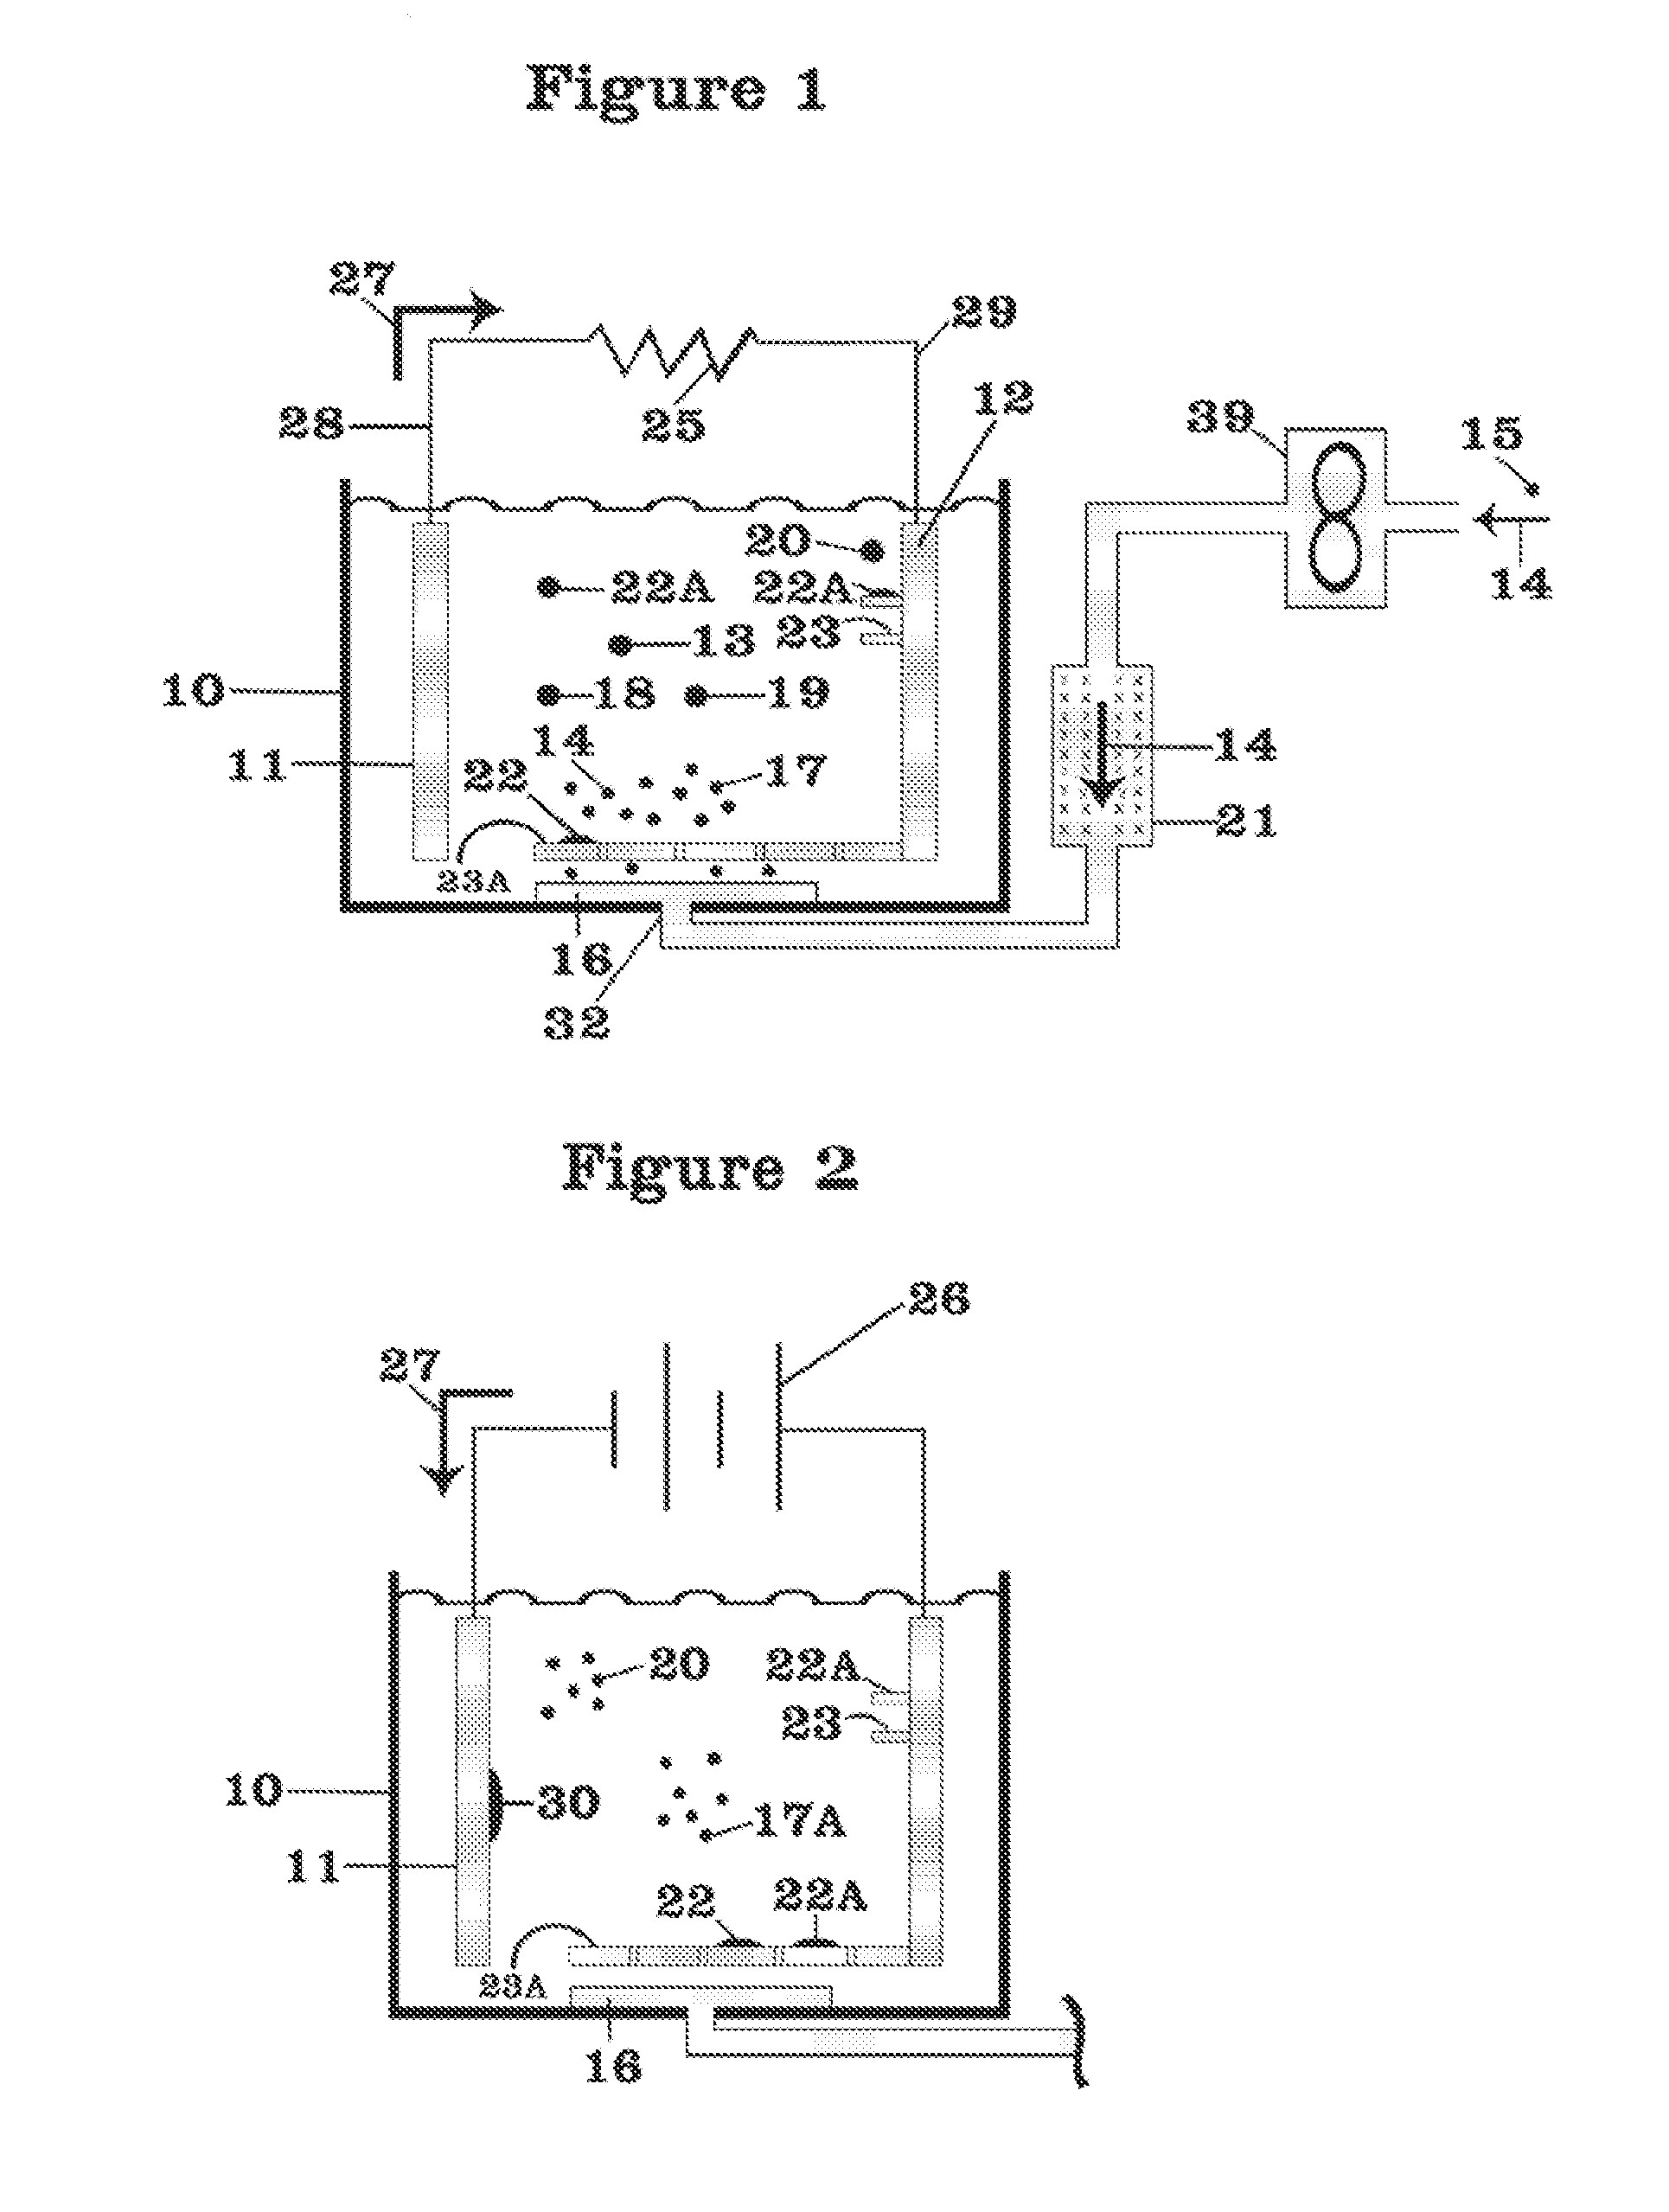 Lithium-air battery for electric vehicles and other applications using molten nitrate electrolytes